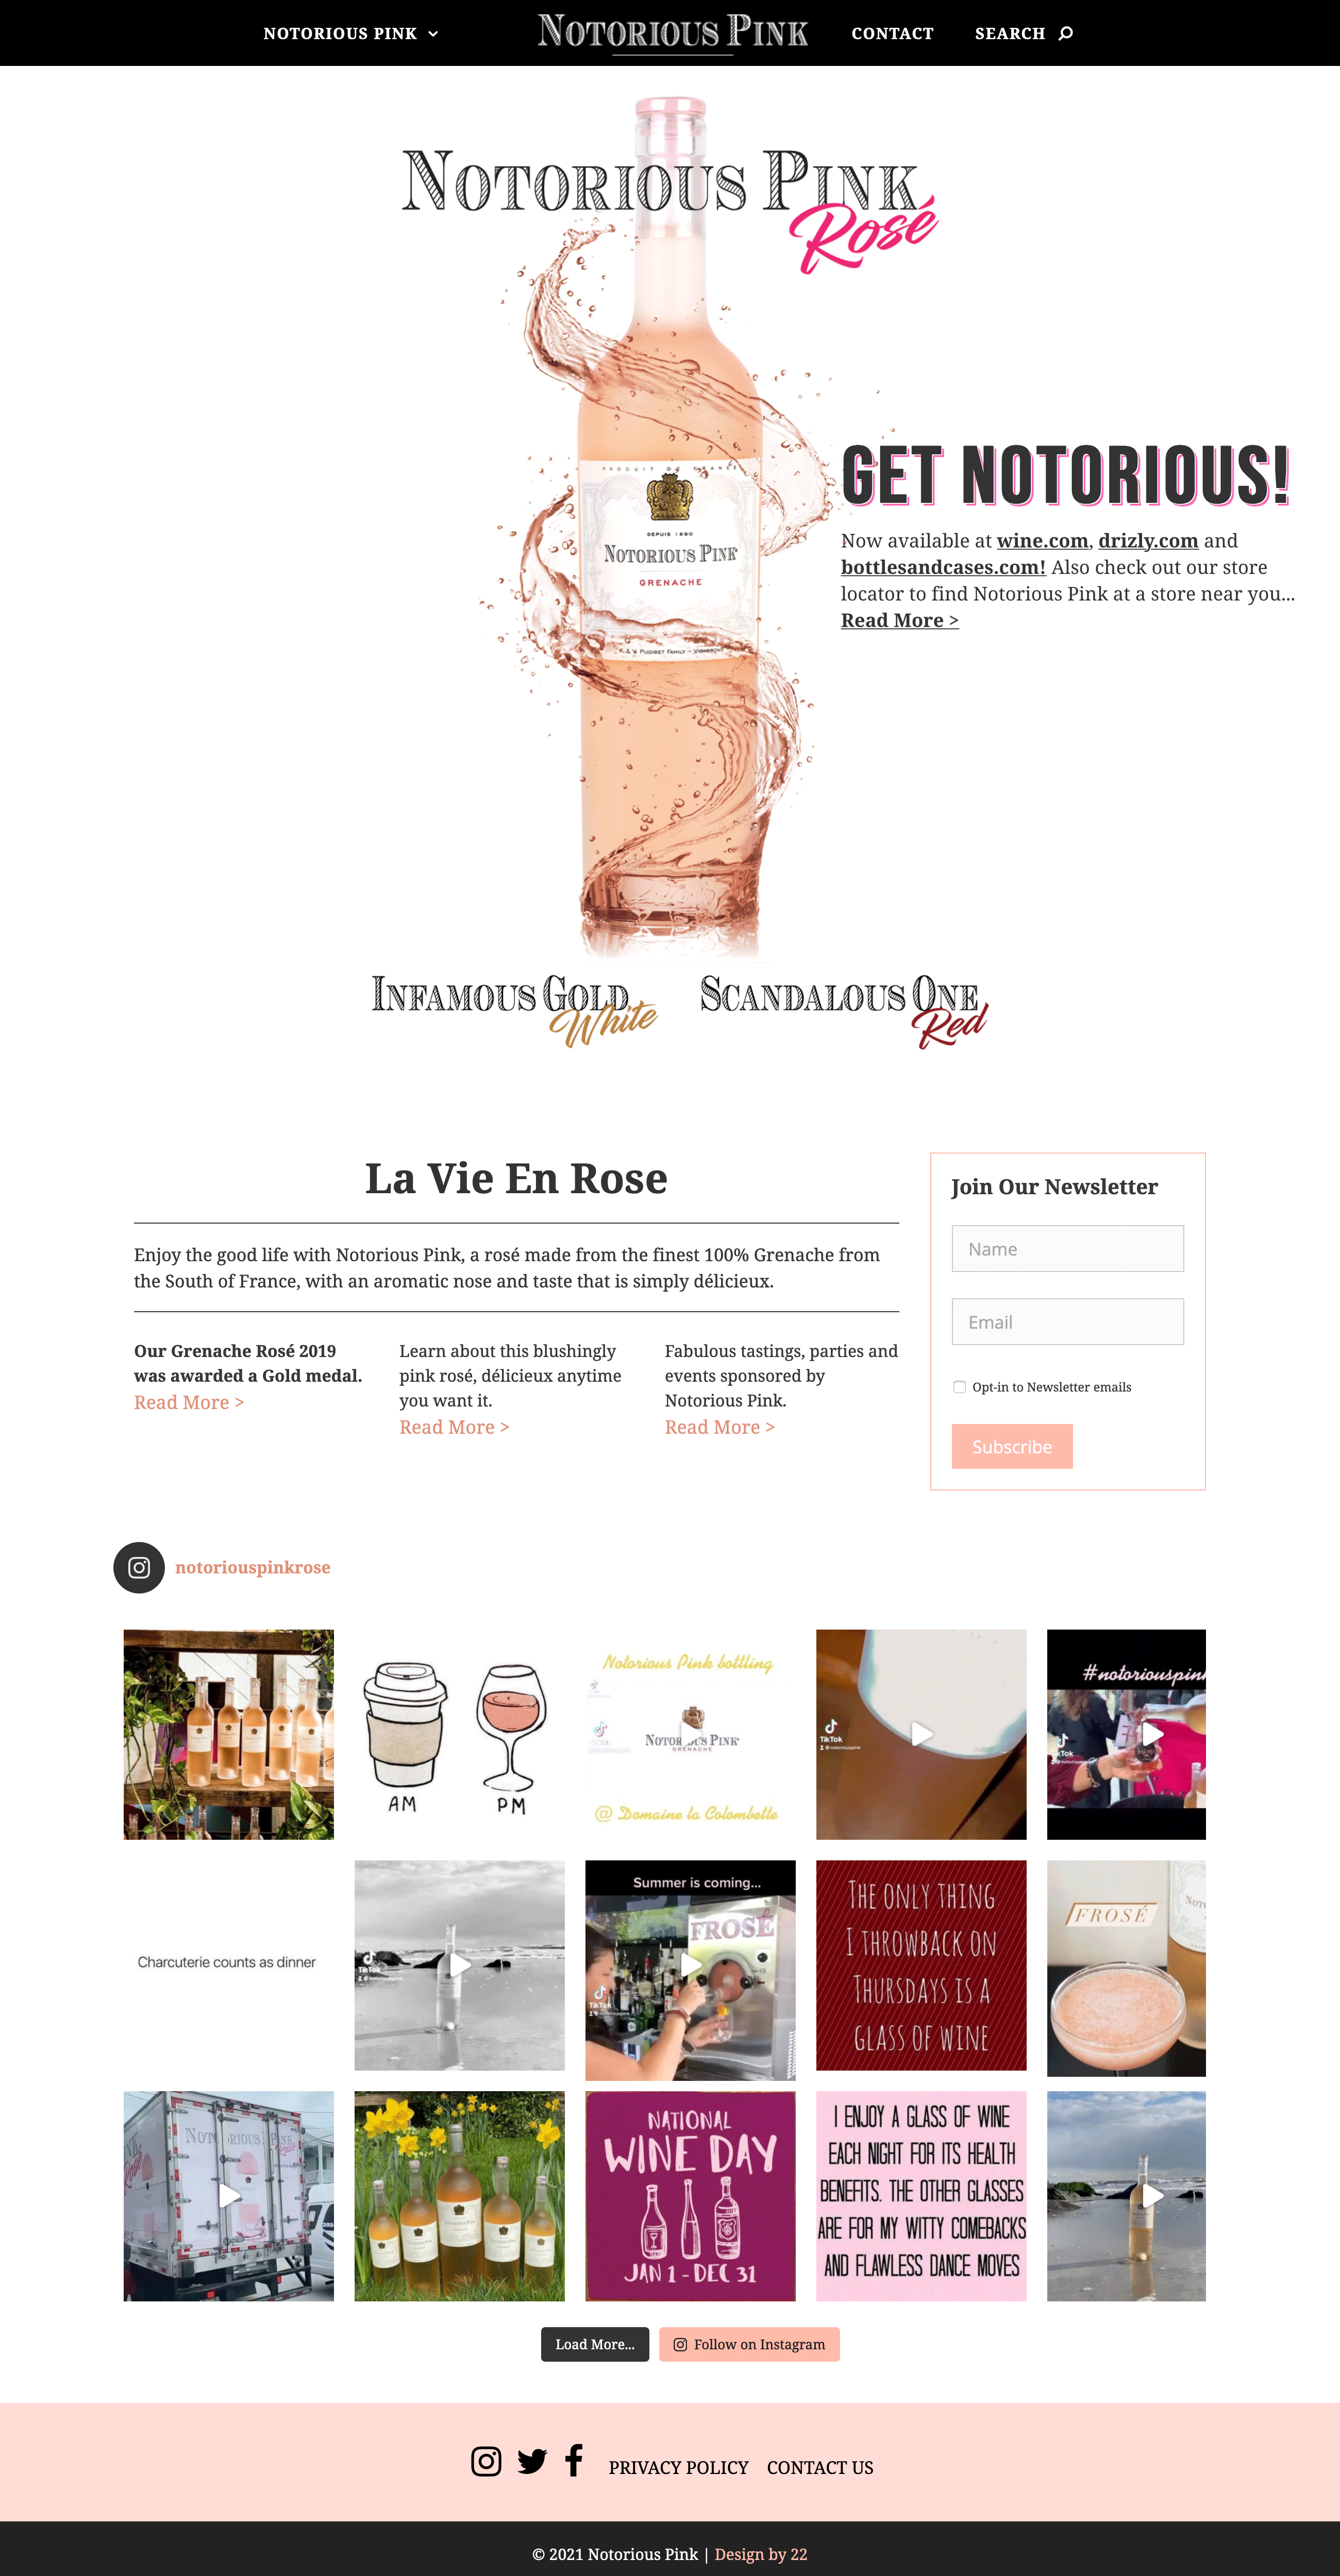 Full view of Notorious Pink homepage